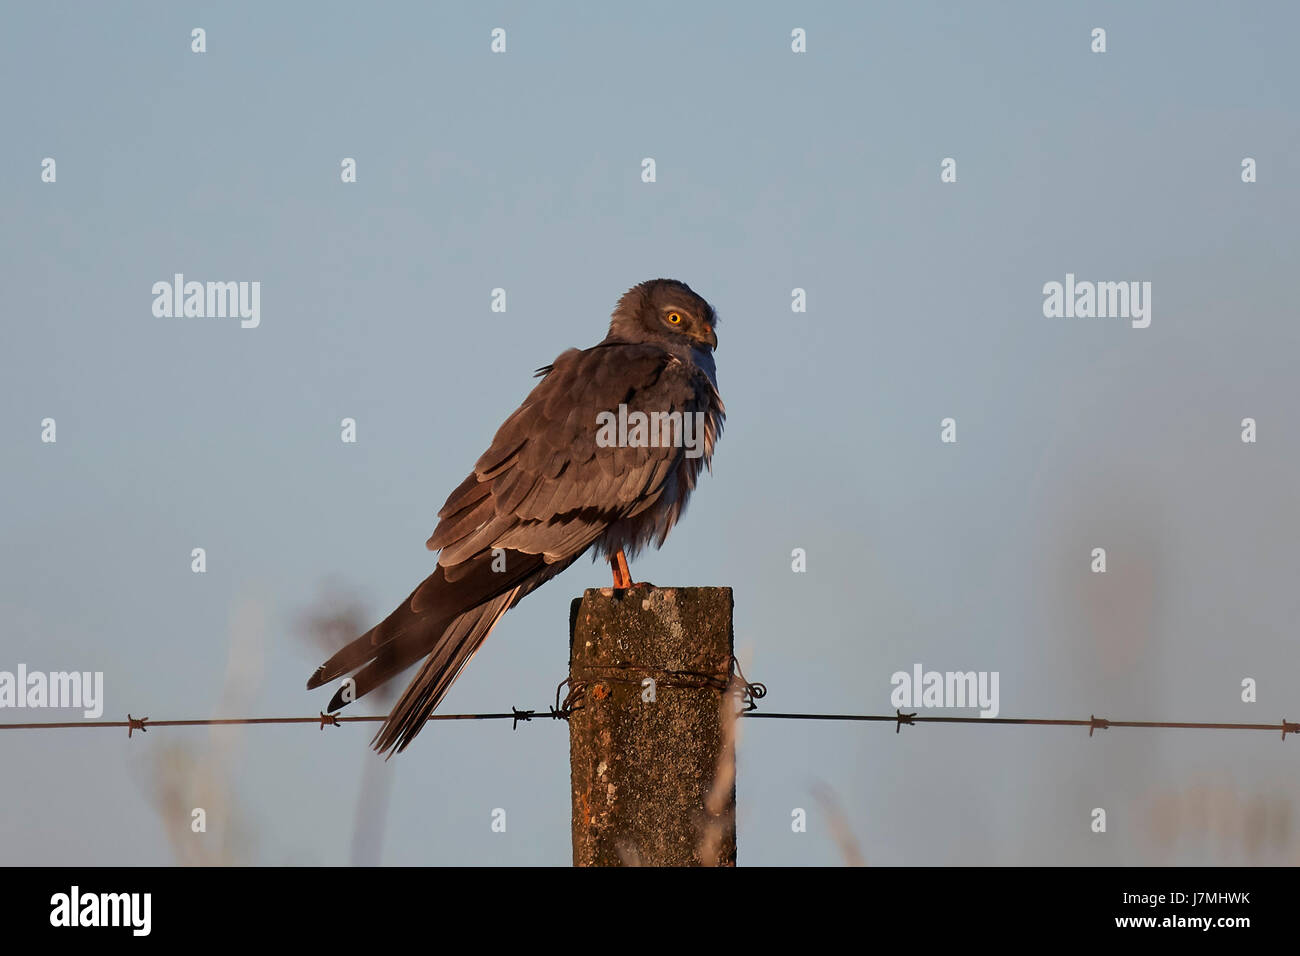 Montagus harrier resting on a pole in the soft light of sunrise Stock Photo